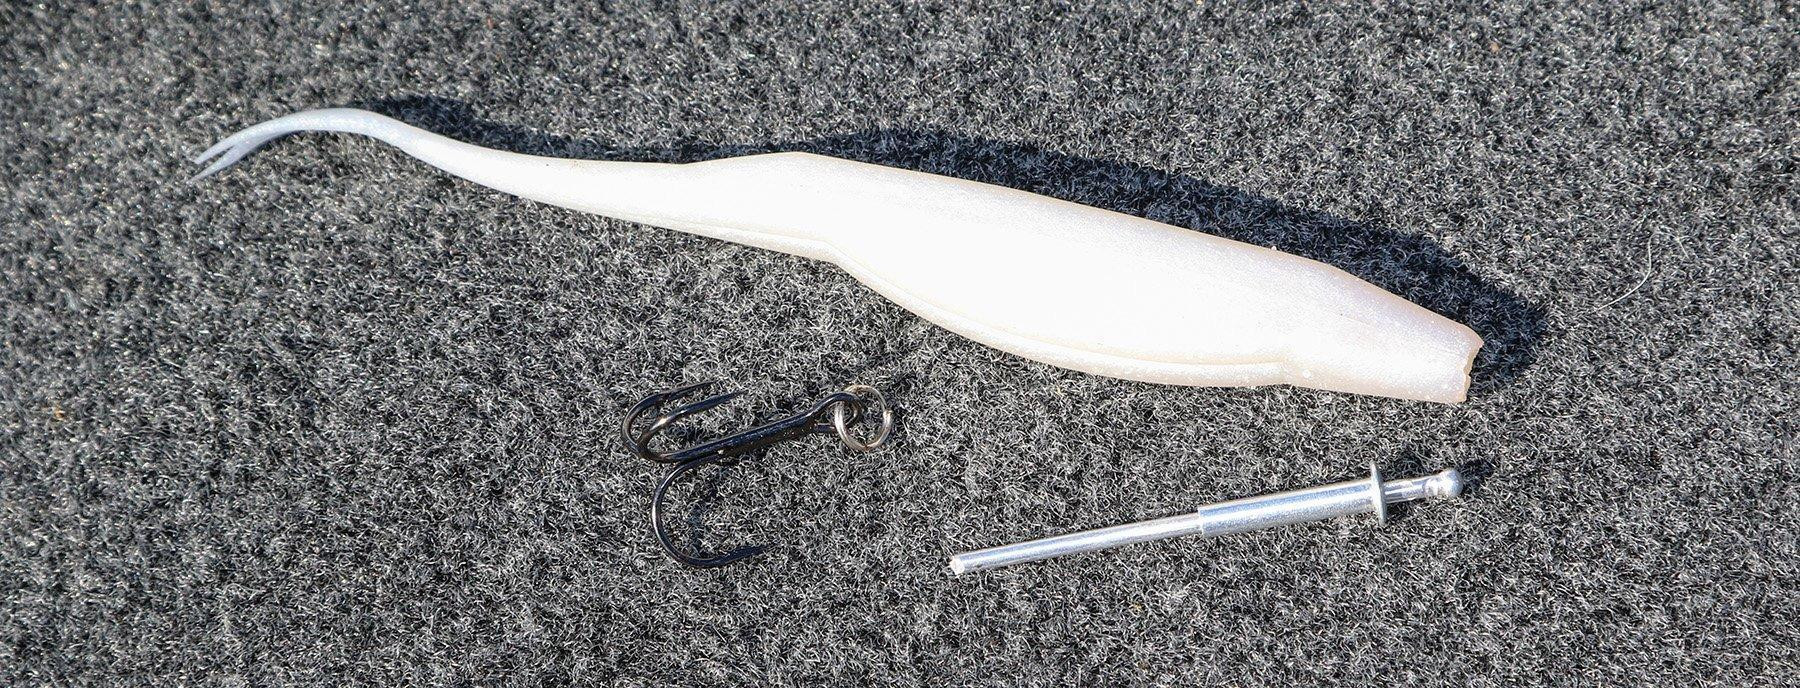 Rigging Soft Jerkbaits for Better Hookups - Wired2Fish